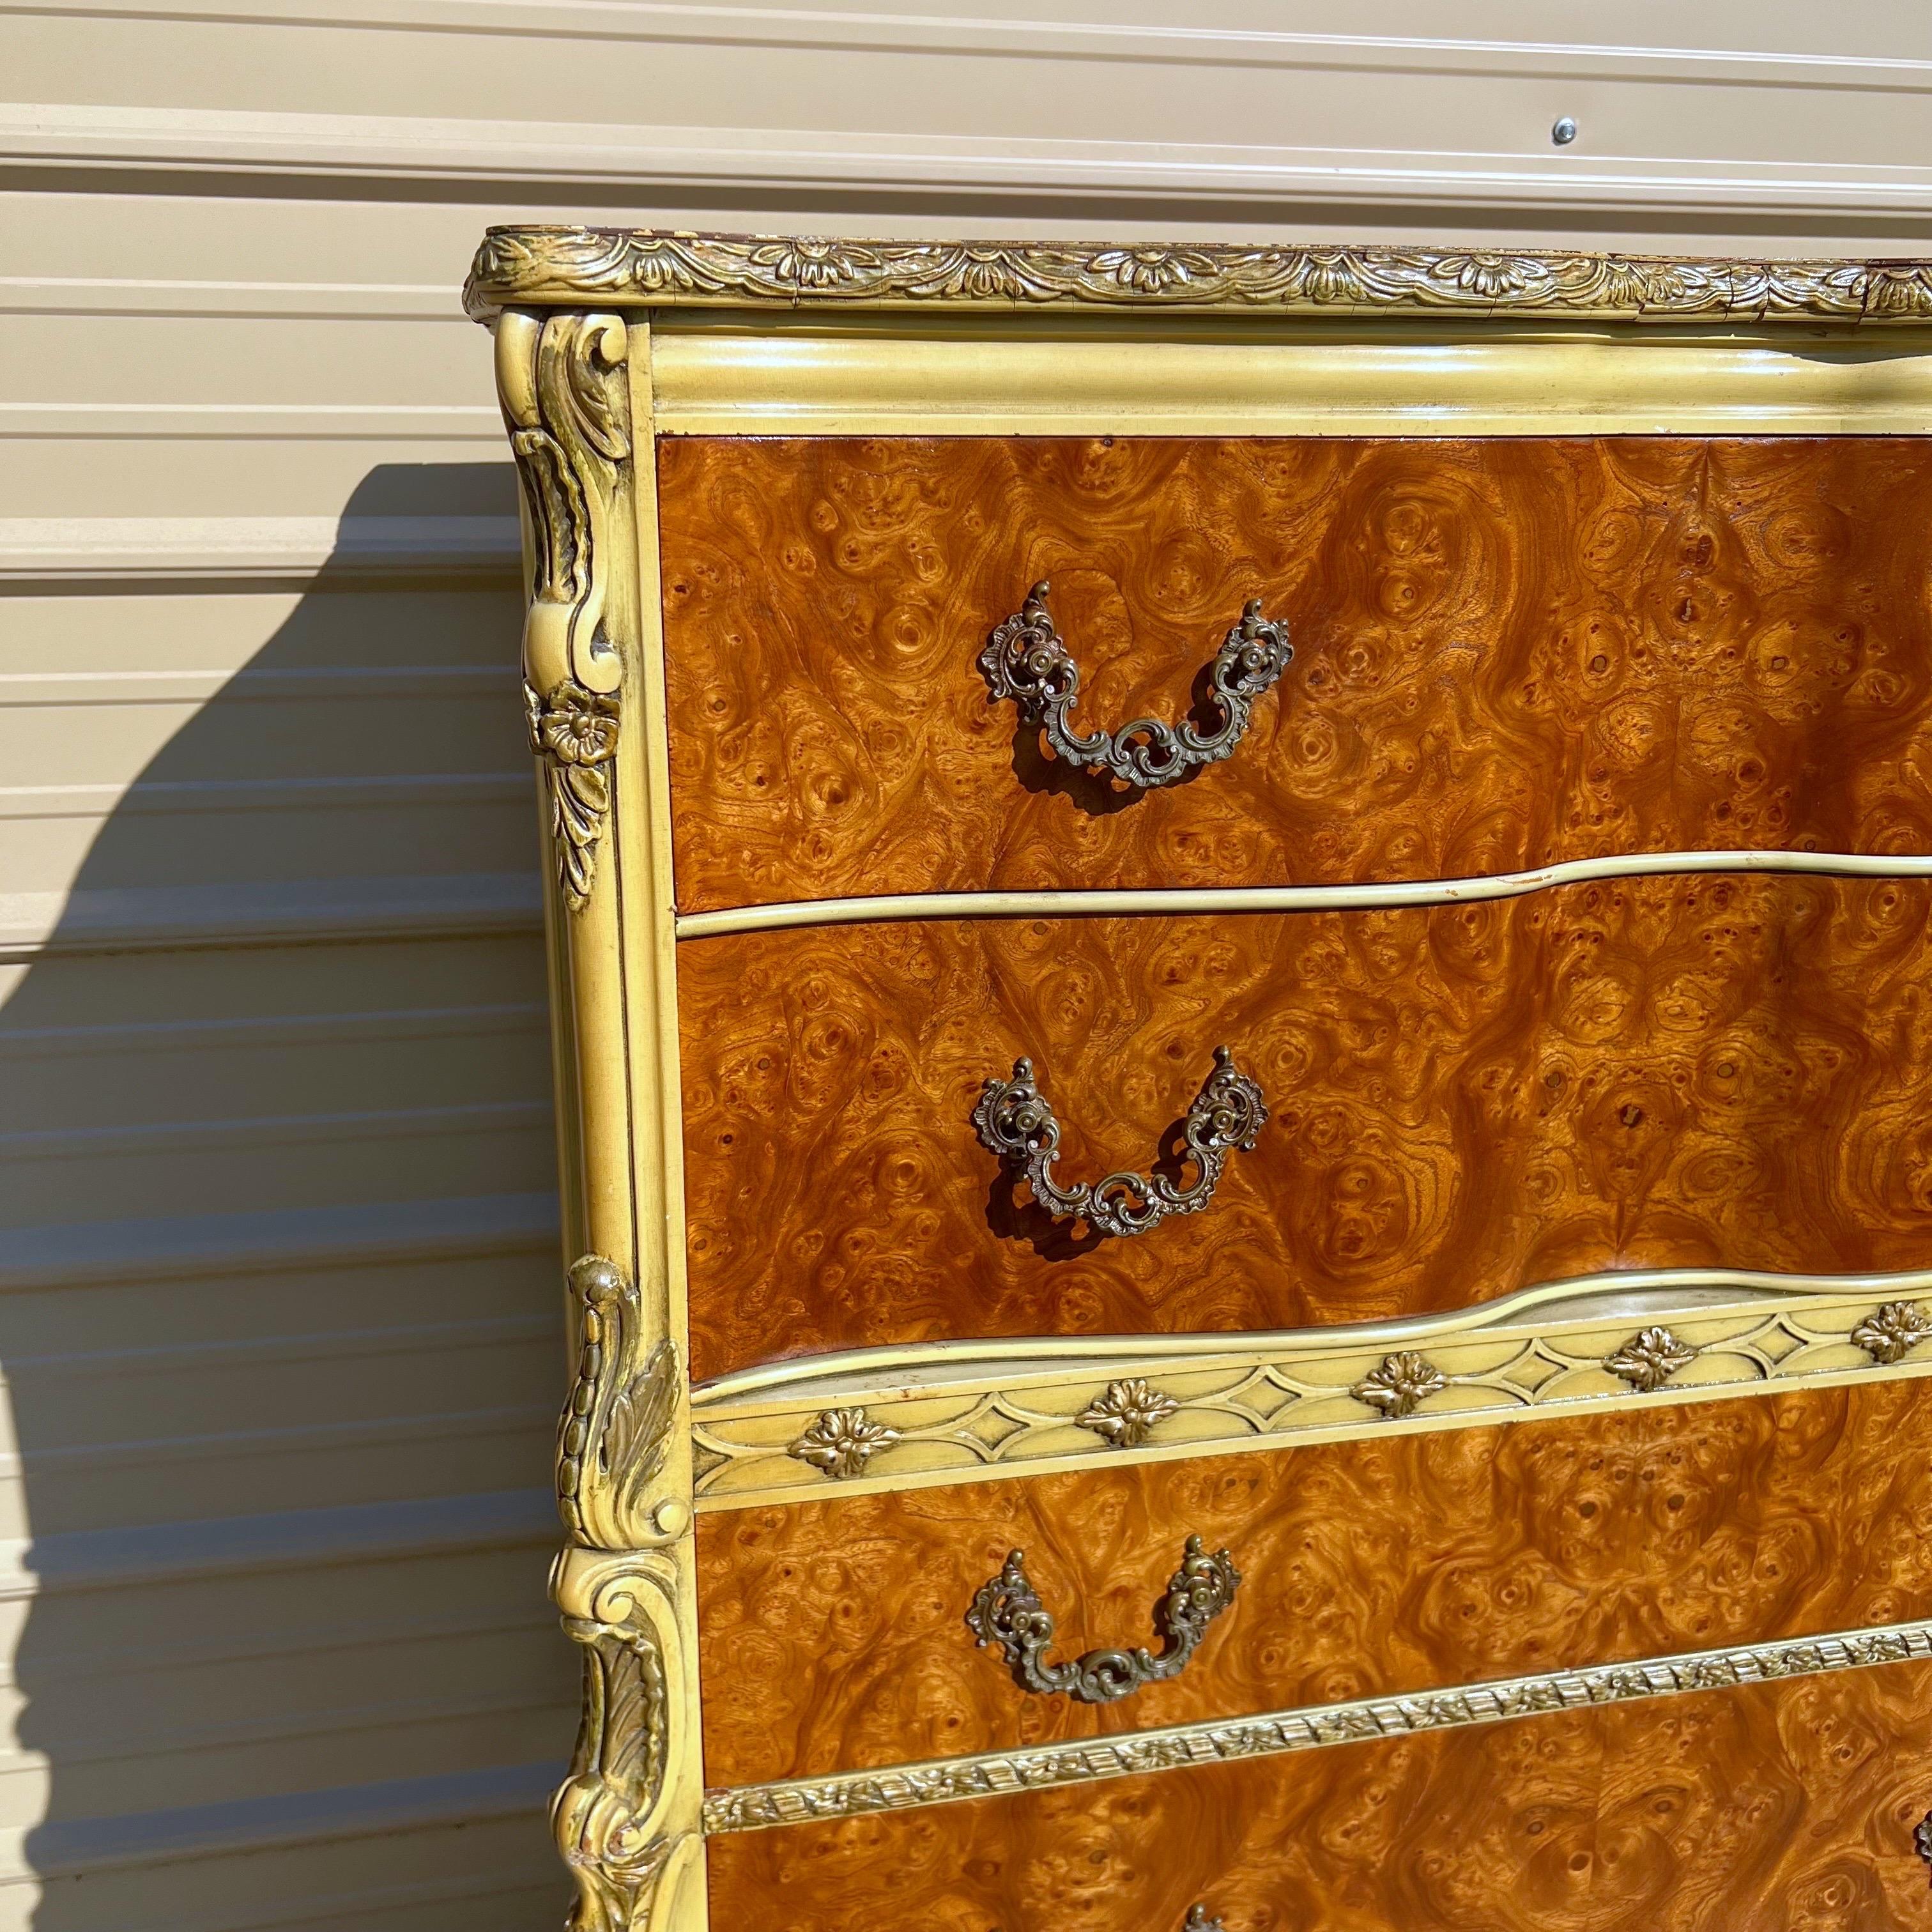 Stunning rare African avoider Burled wood with ornate carved details, hand painted, and original brass hardware.  A very sexy serpentine front on the top drawers.  Manufactured in the USA by Romweber circa 1940’s.   Please see our other listings for